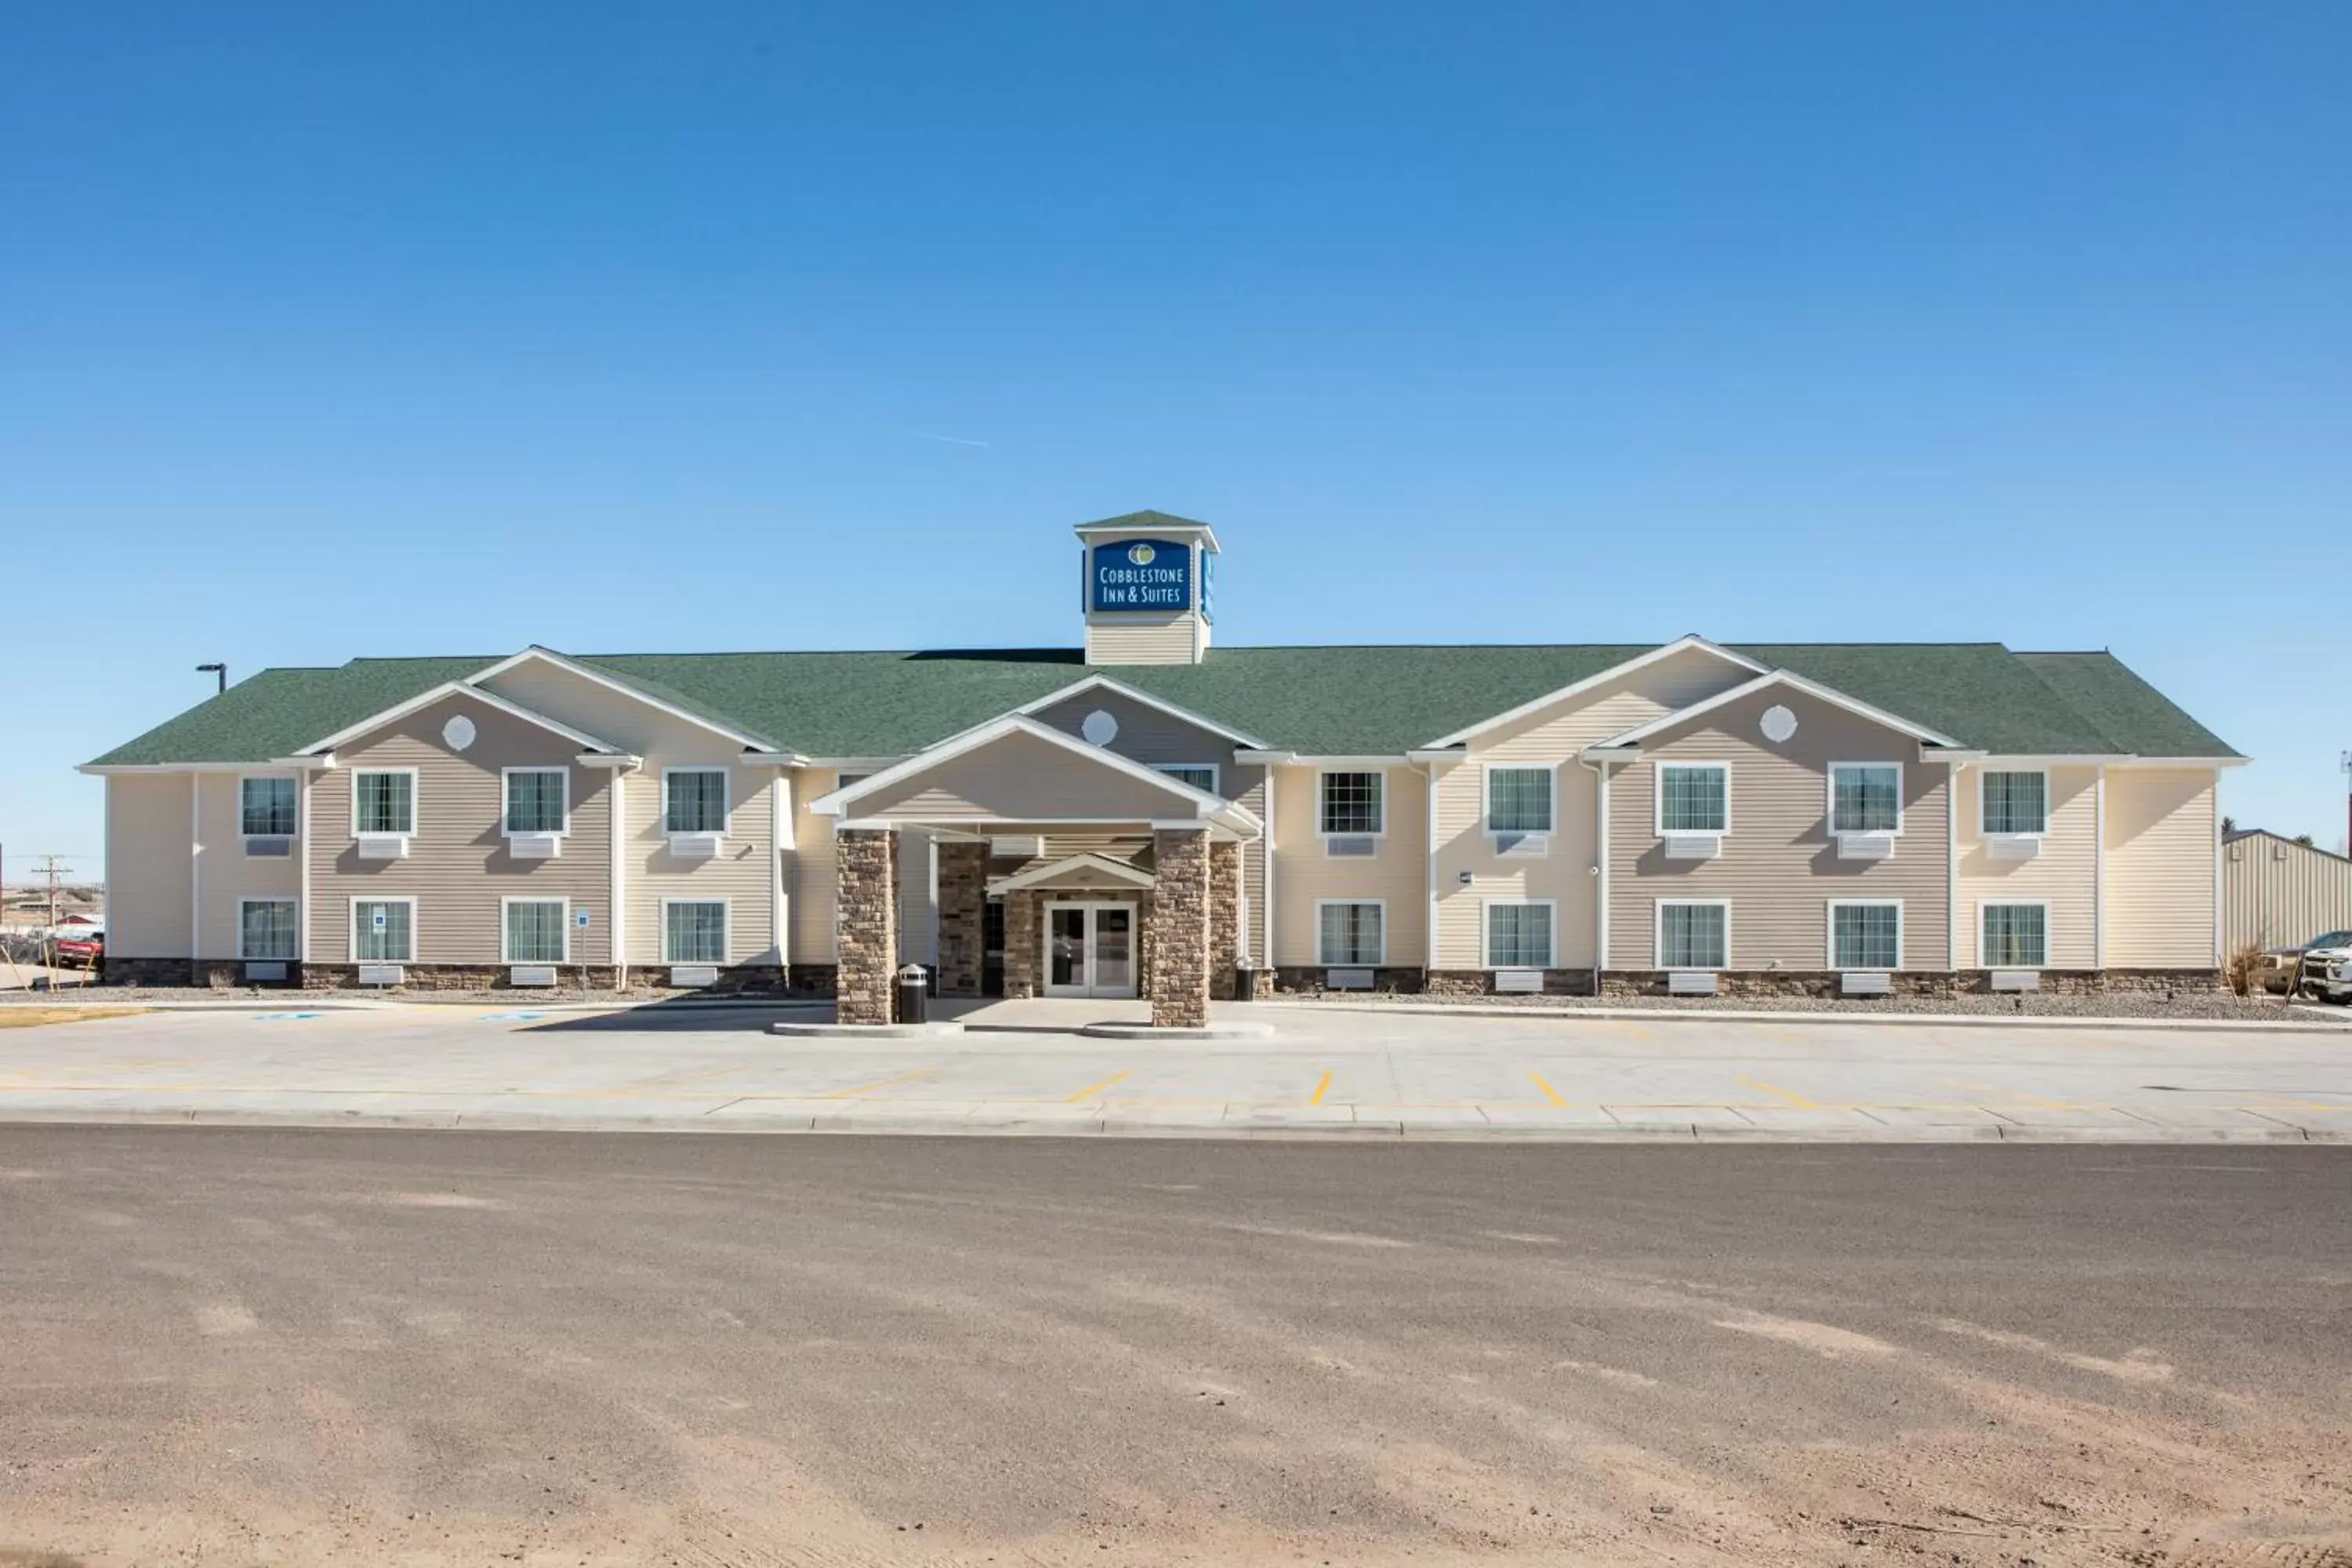 Facade/entrance, Property Building in Cobblestone Inn & Suites - Pine Bluffs